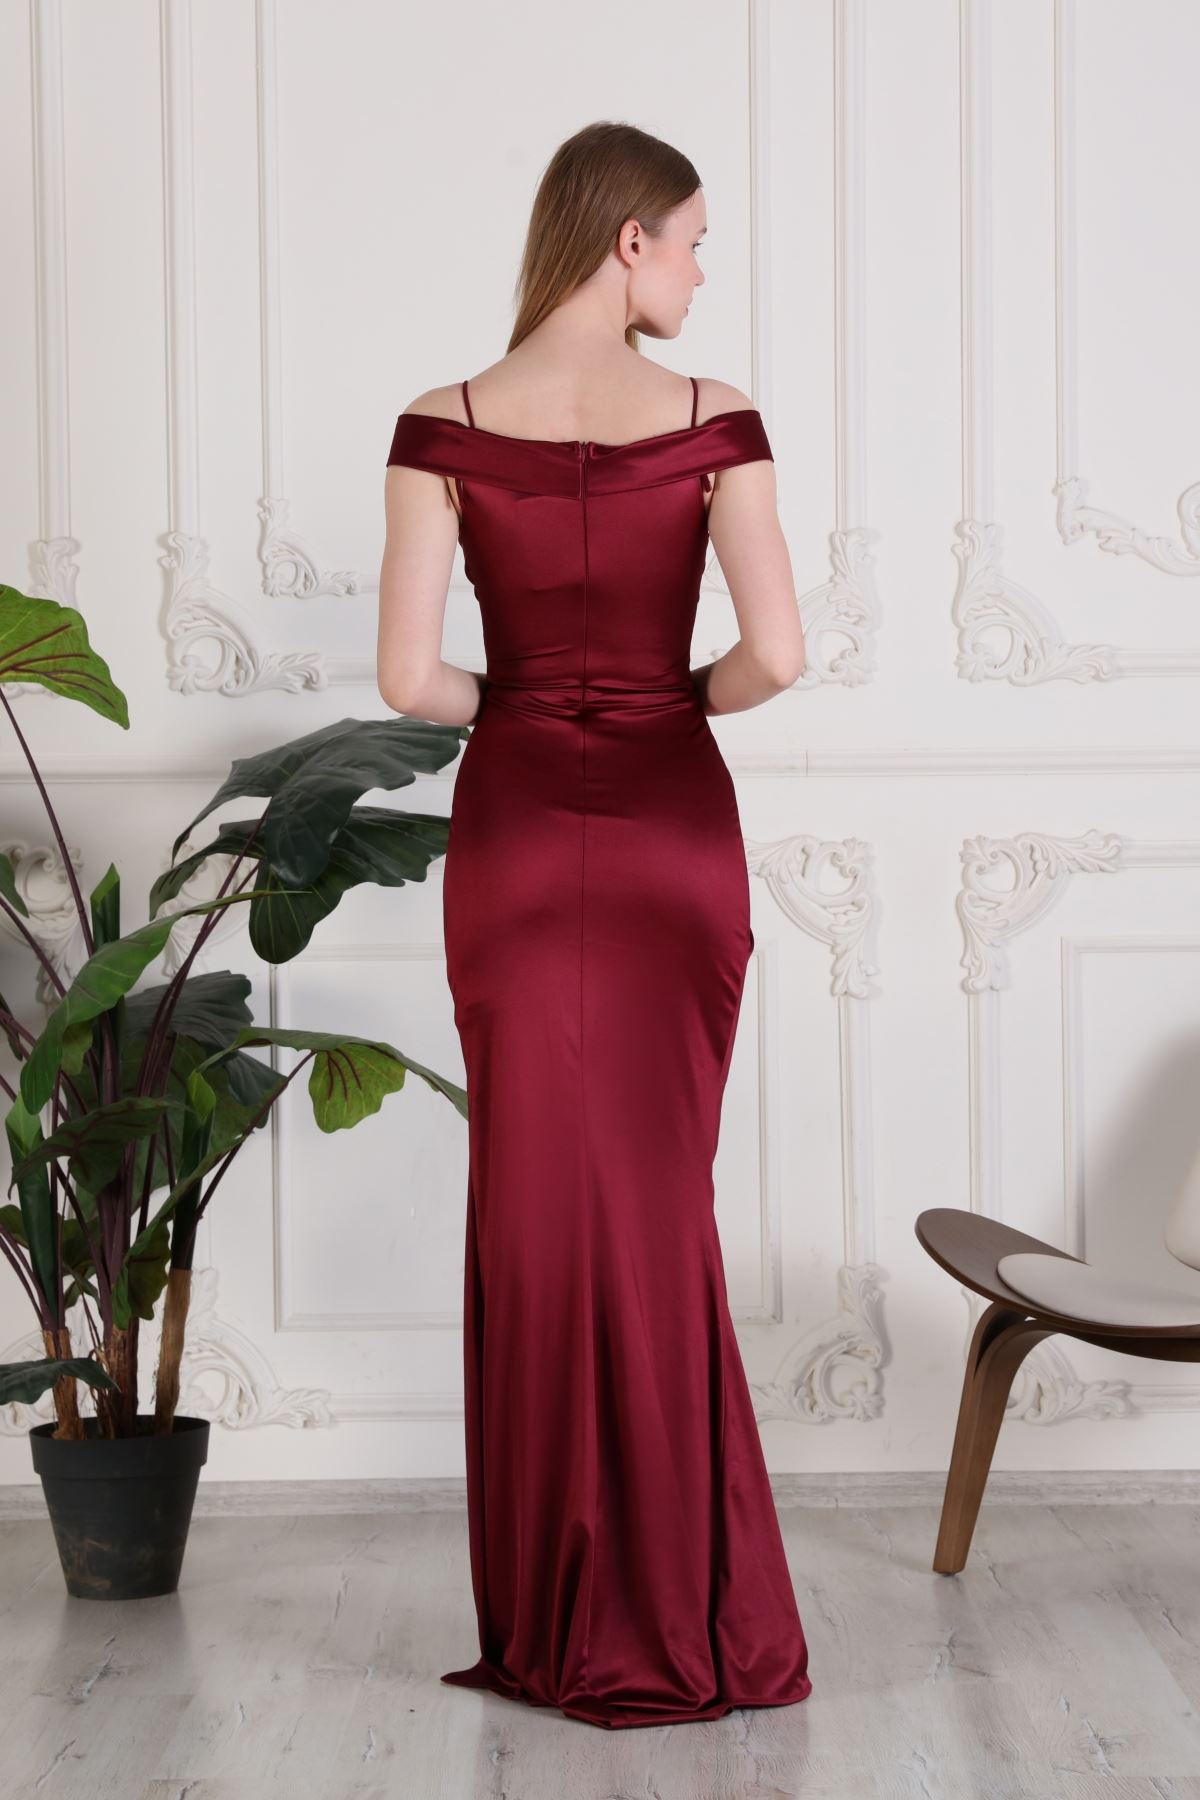 Low Sleeve Women's Evening Dresses with Slit I Straps